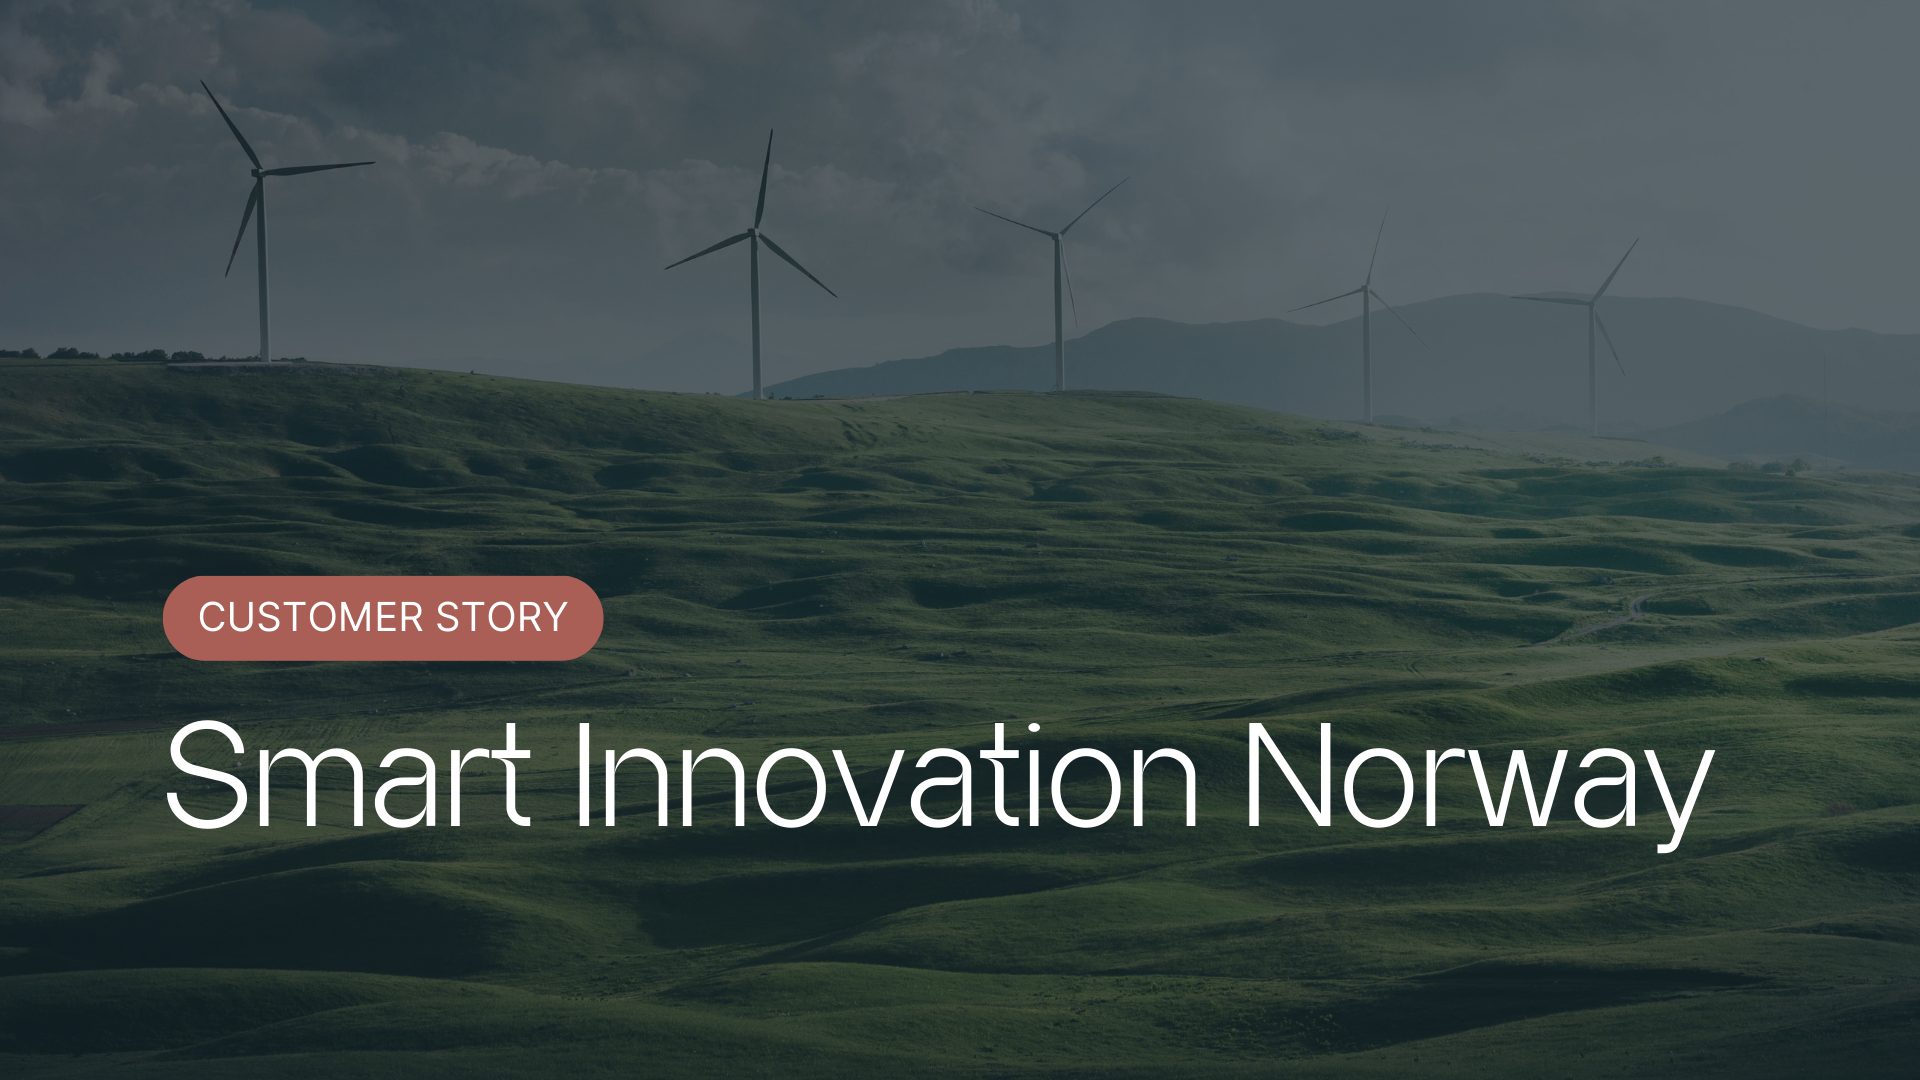 Smart Innovation Norway chose InstiPro from Arribatec